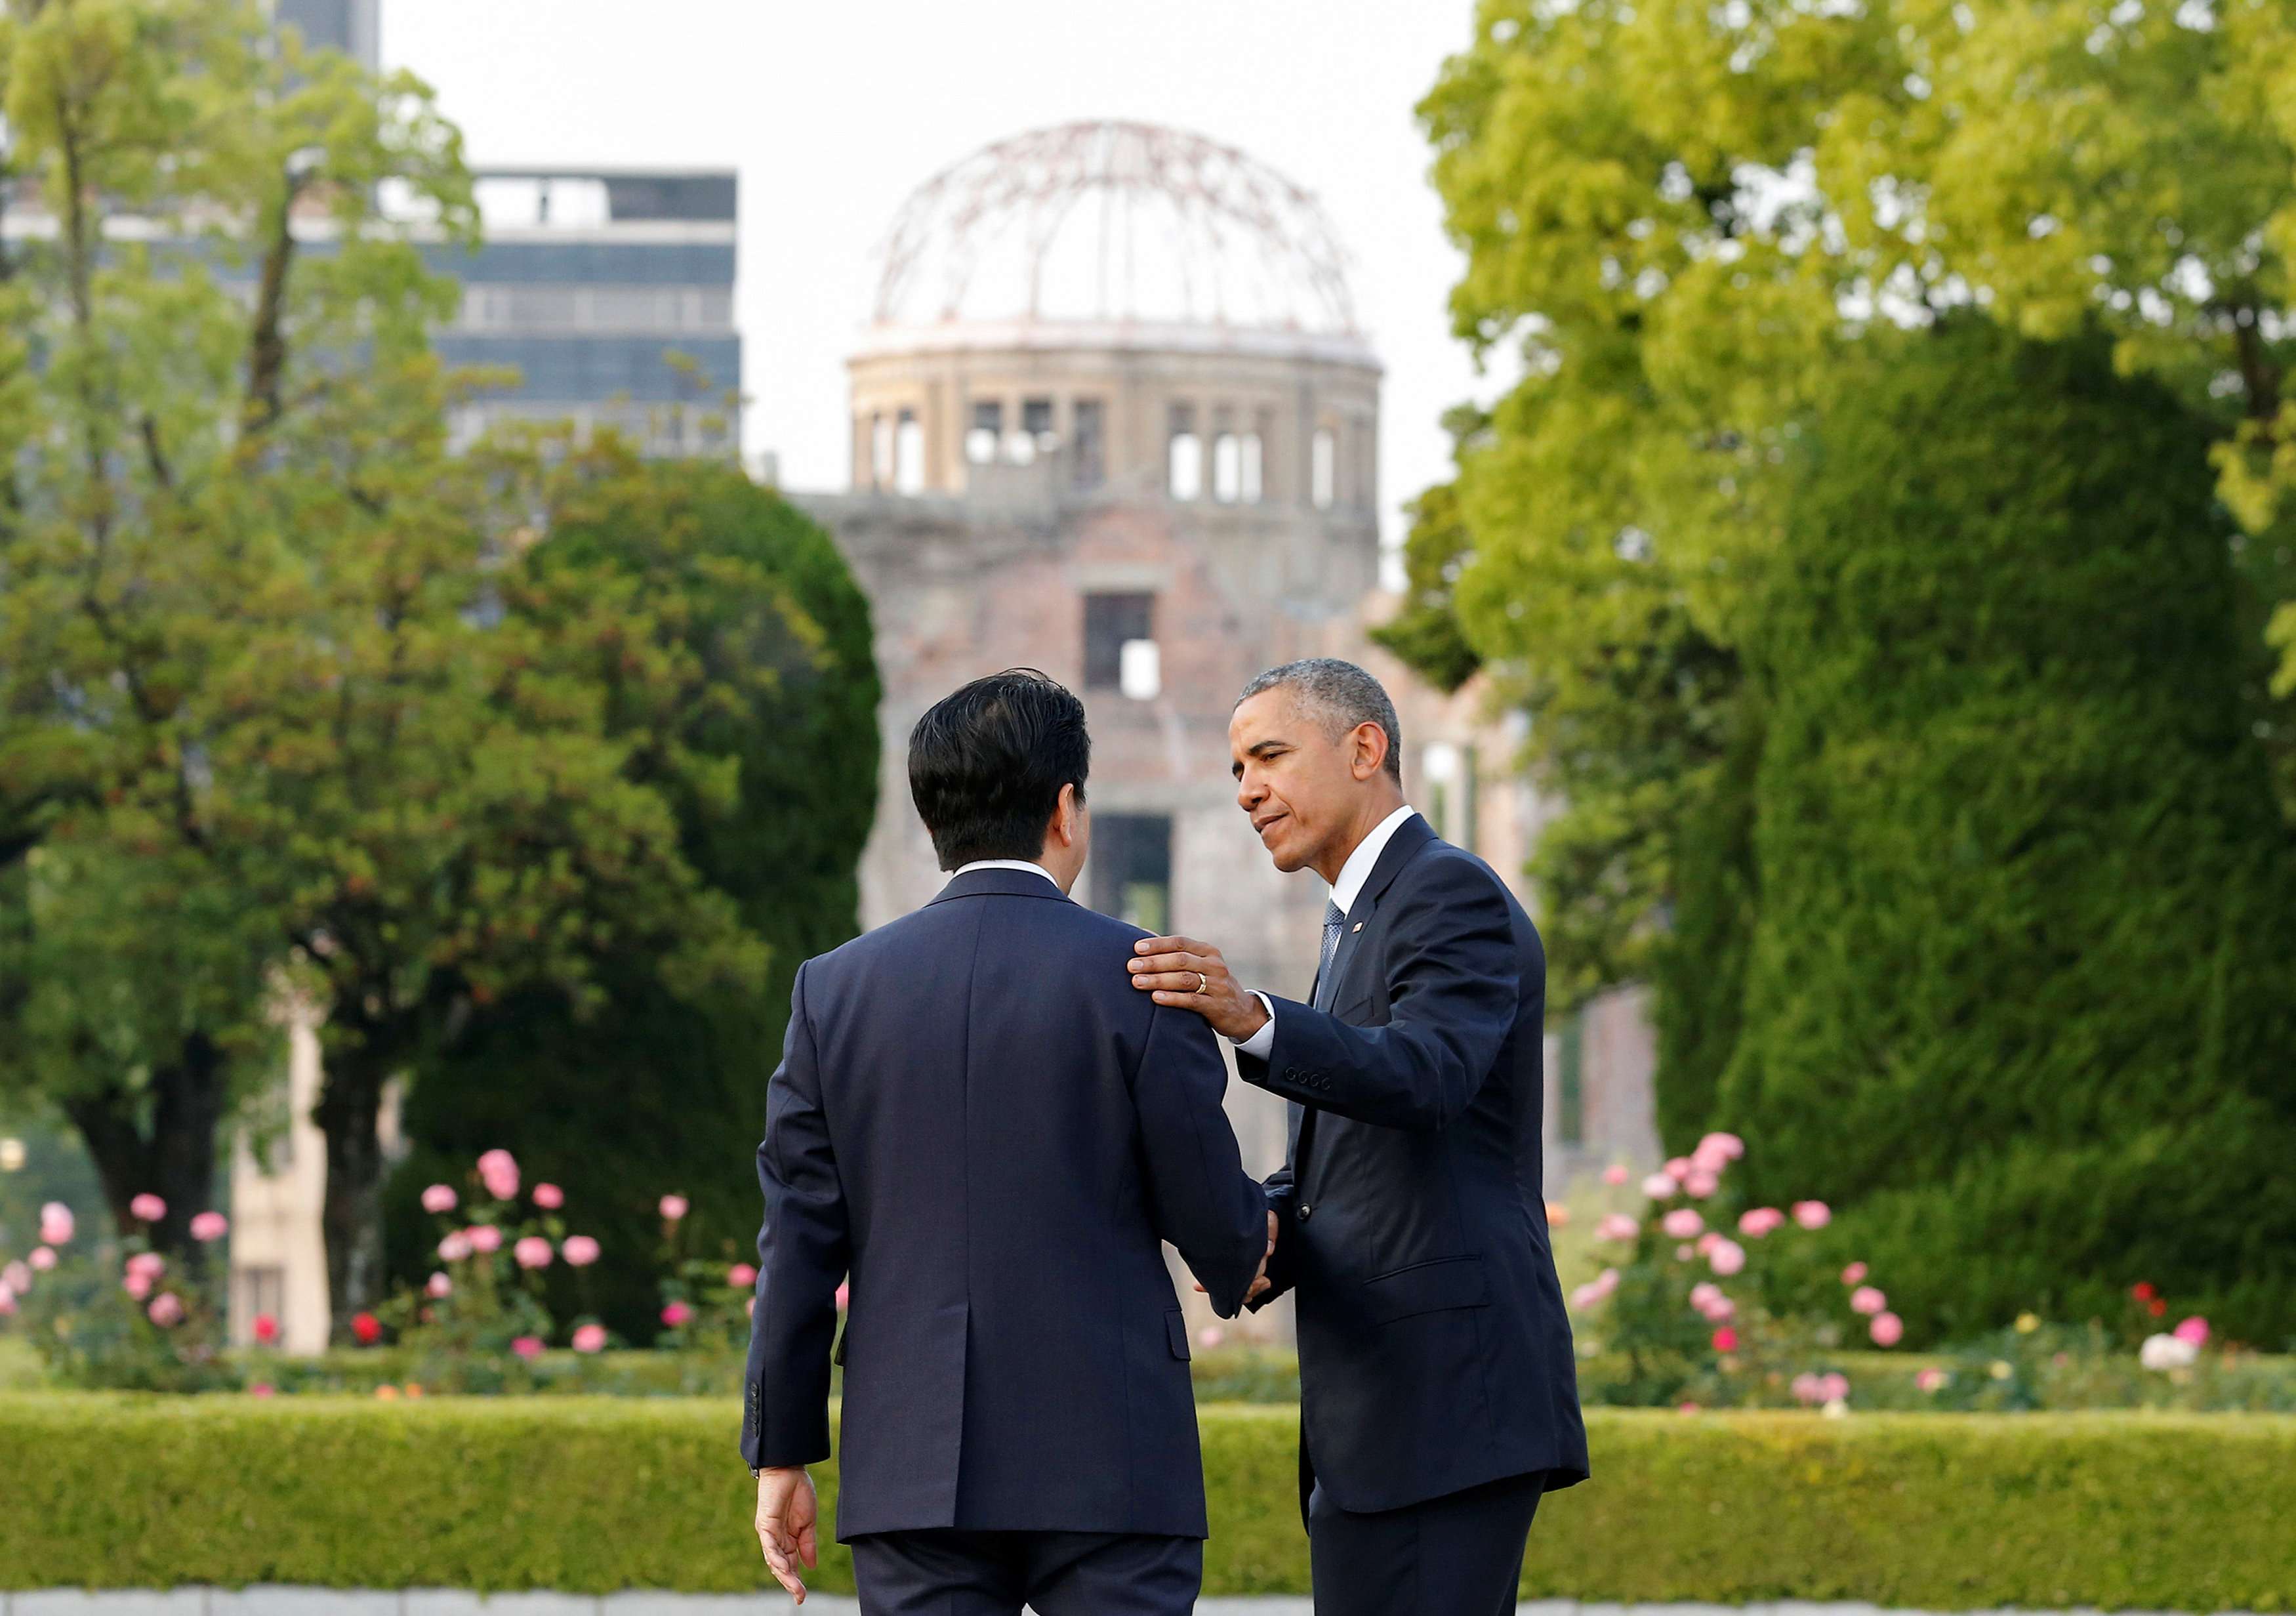 US President Barack Obama shares a poignant moment with Japanese Prime Minister Shinzo Abe after they laid wreaths in front of a cenotaph, with the atomic bomb dome in the background, at Hiroshima Peace Memorial Park. Photo: Reuters